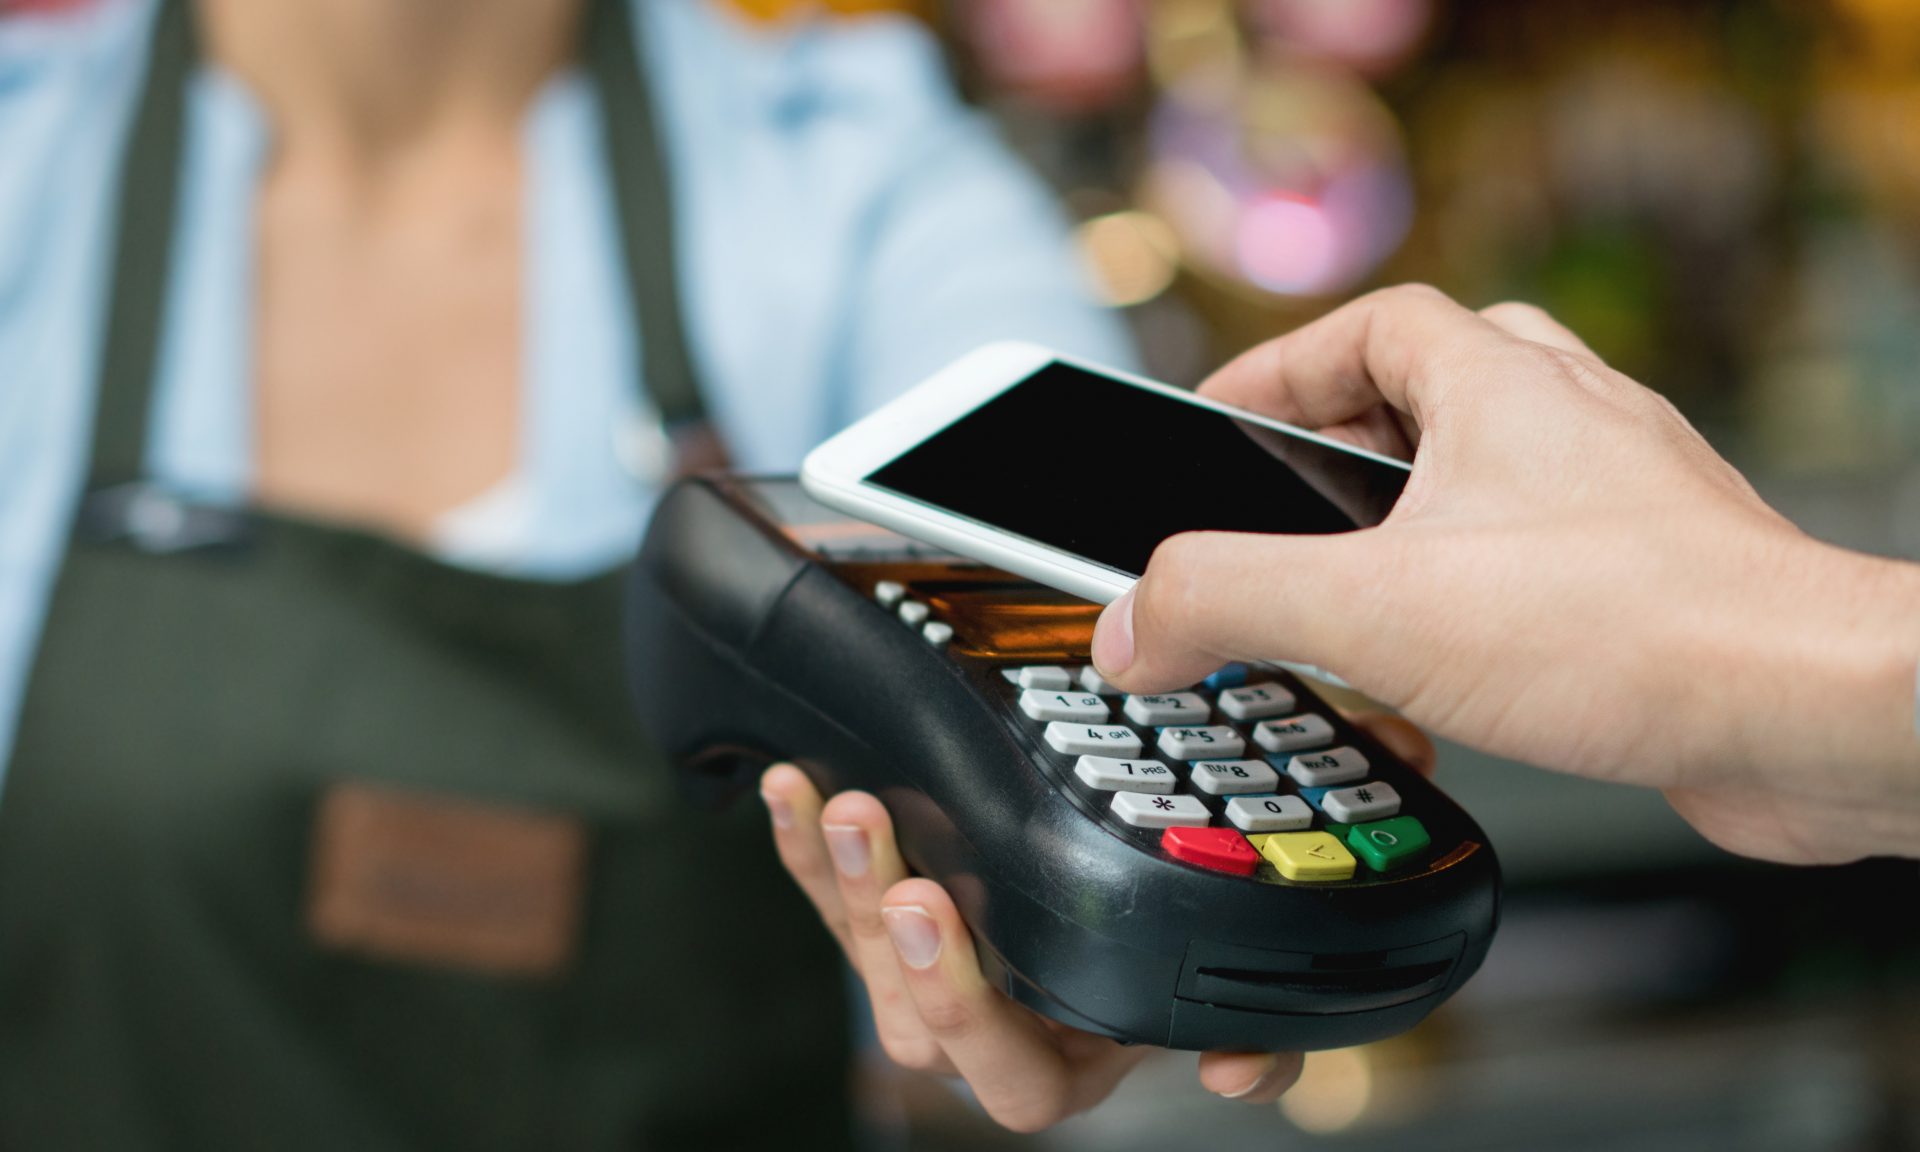 Credit Card Terminals and Point of Sale Systems